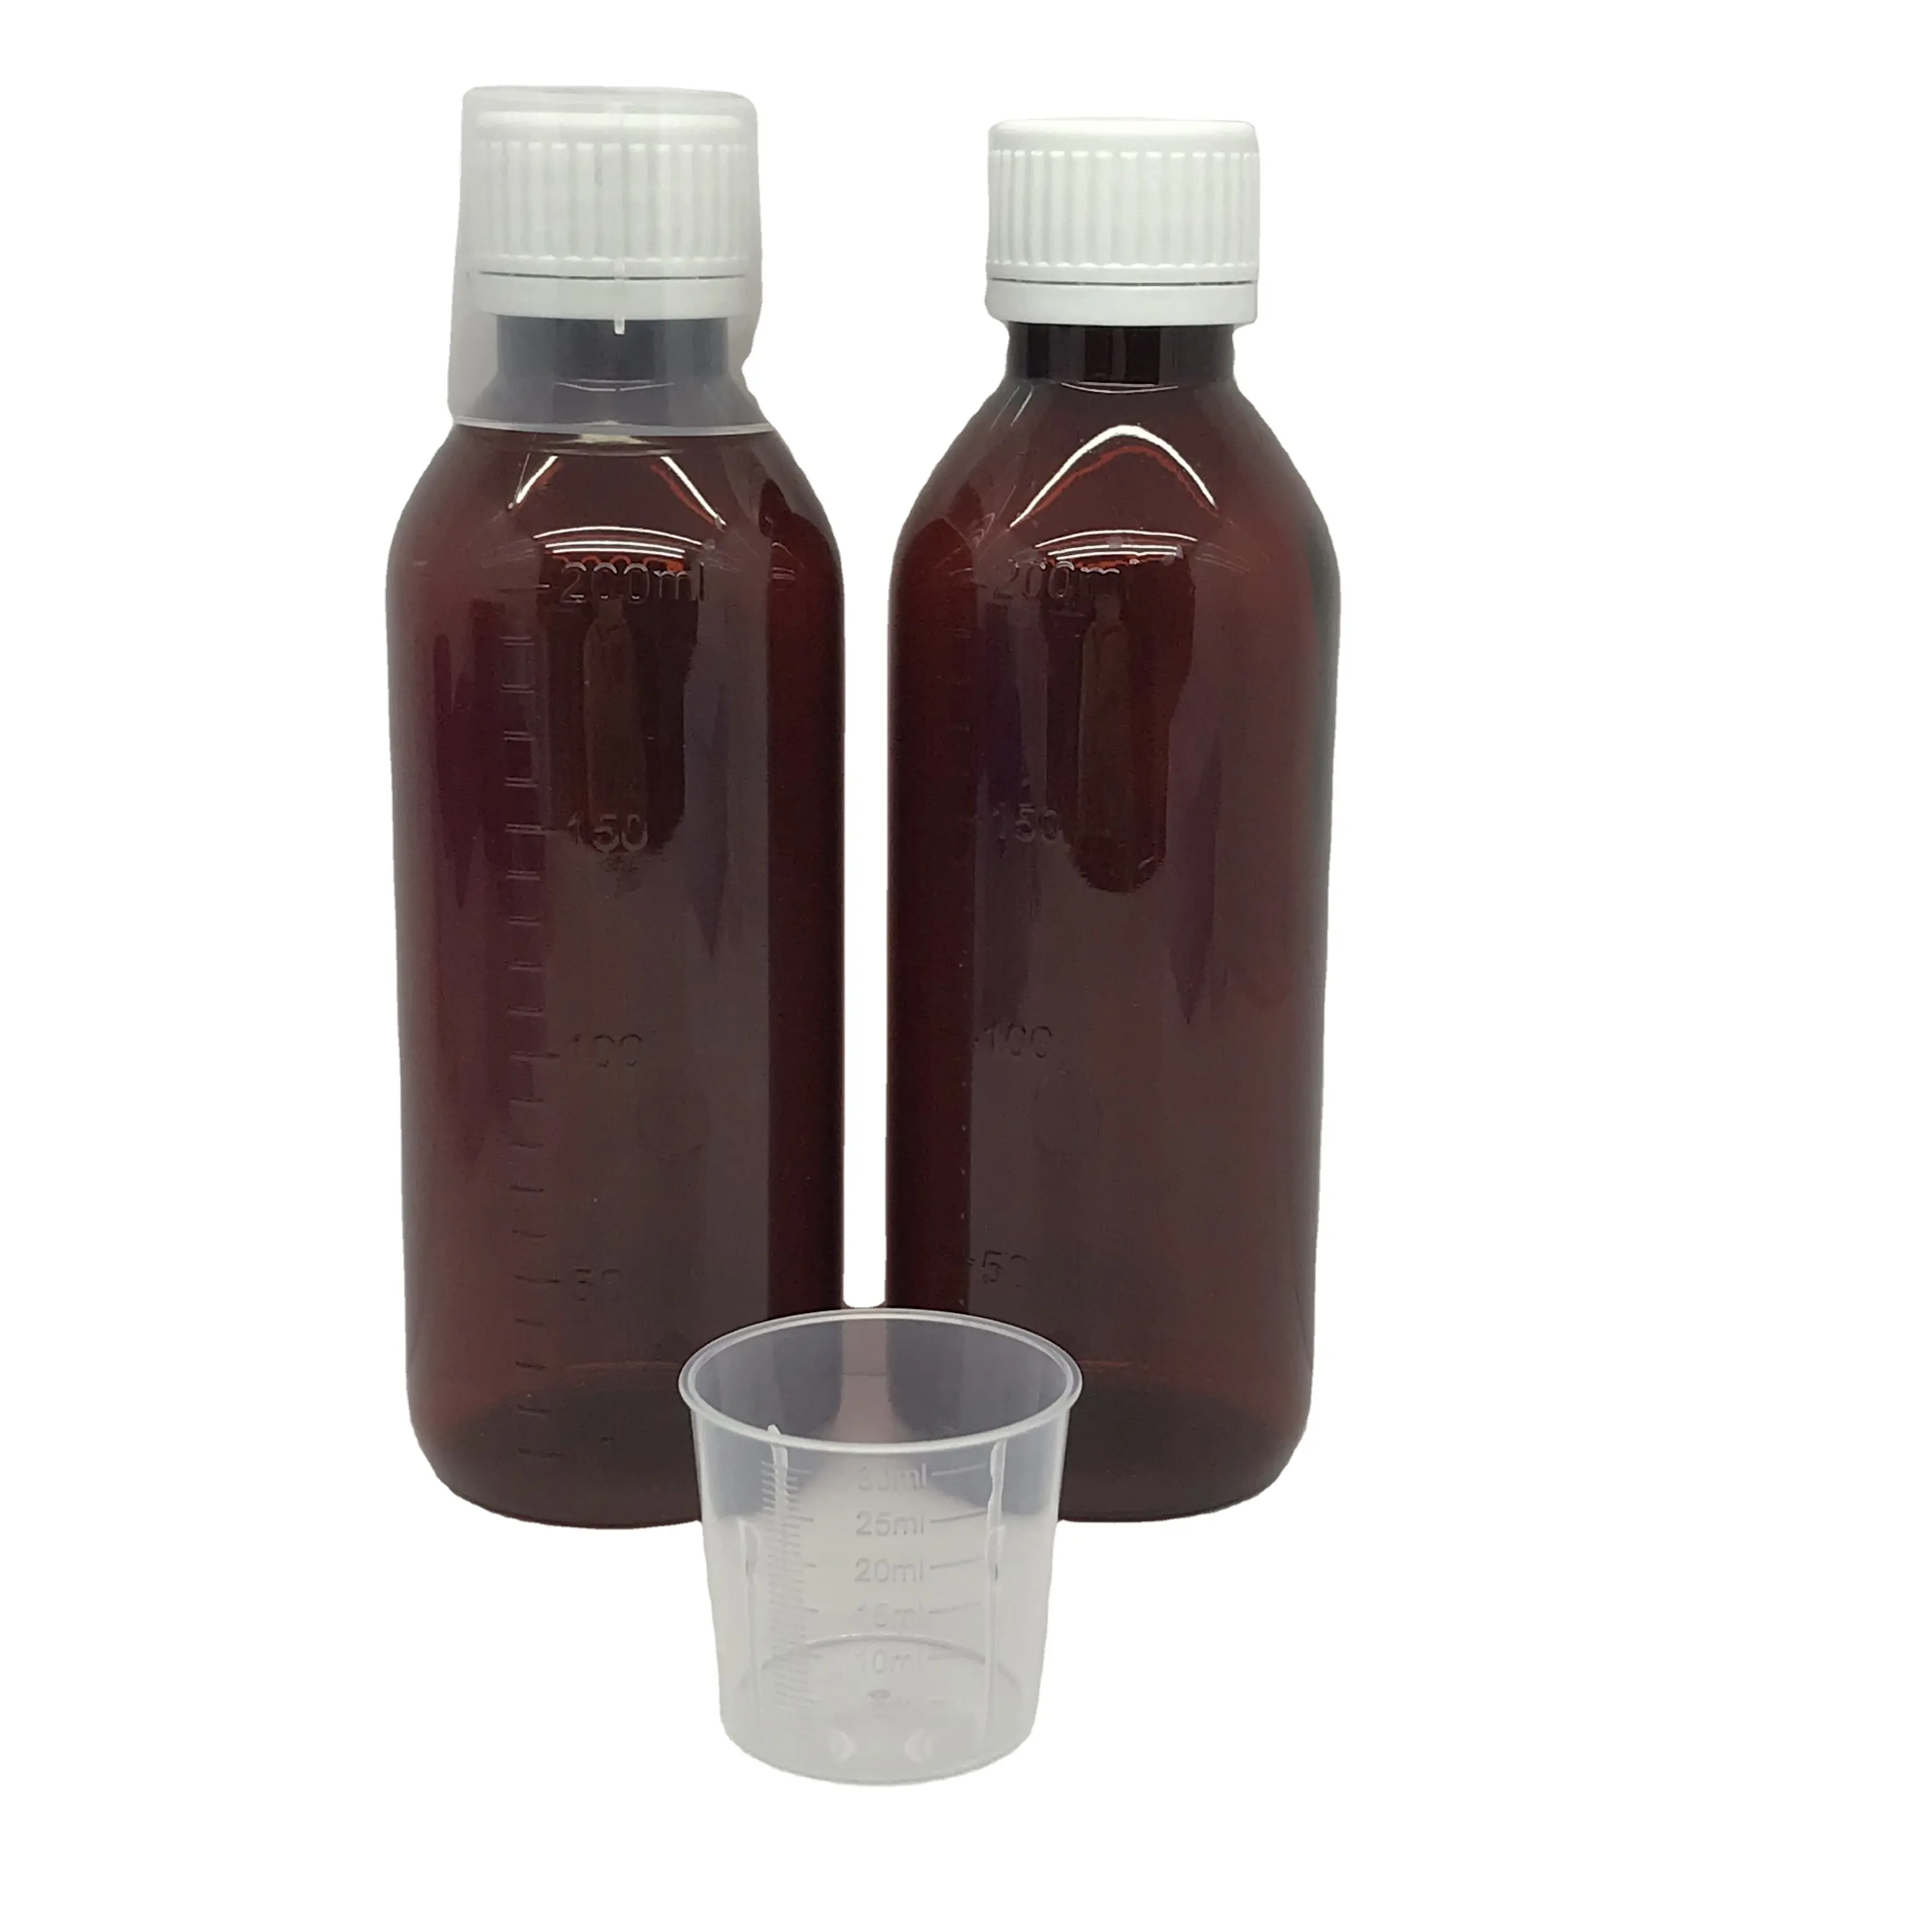 PET amber container cough syrup bottle medicine liquid plastic bottle with syrup measuring medicine cup